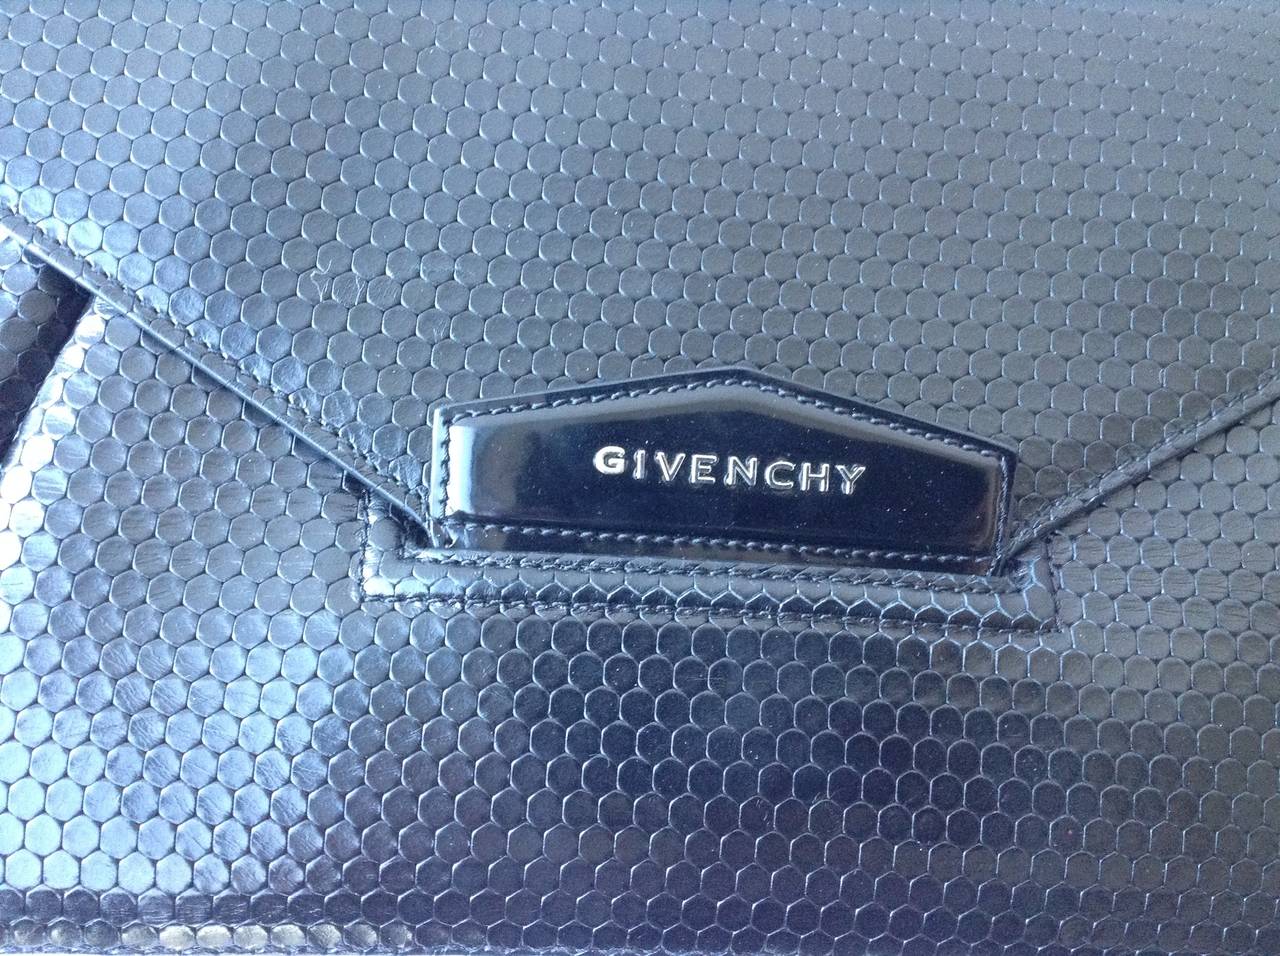 Givenchy Black leather Antigona envelope clutch.

Front flap detailed with metal logo letters; pleated body
Lined with cotton canvas; three-compartment interior
Slip-tab closure
8.25